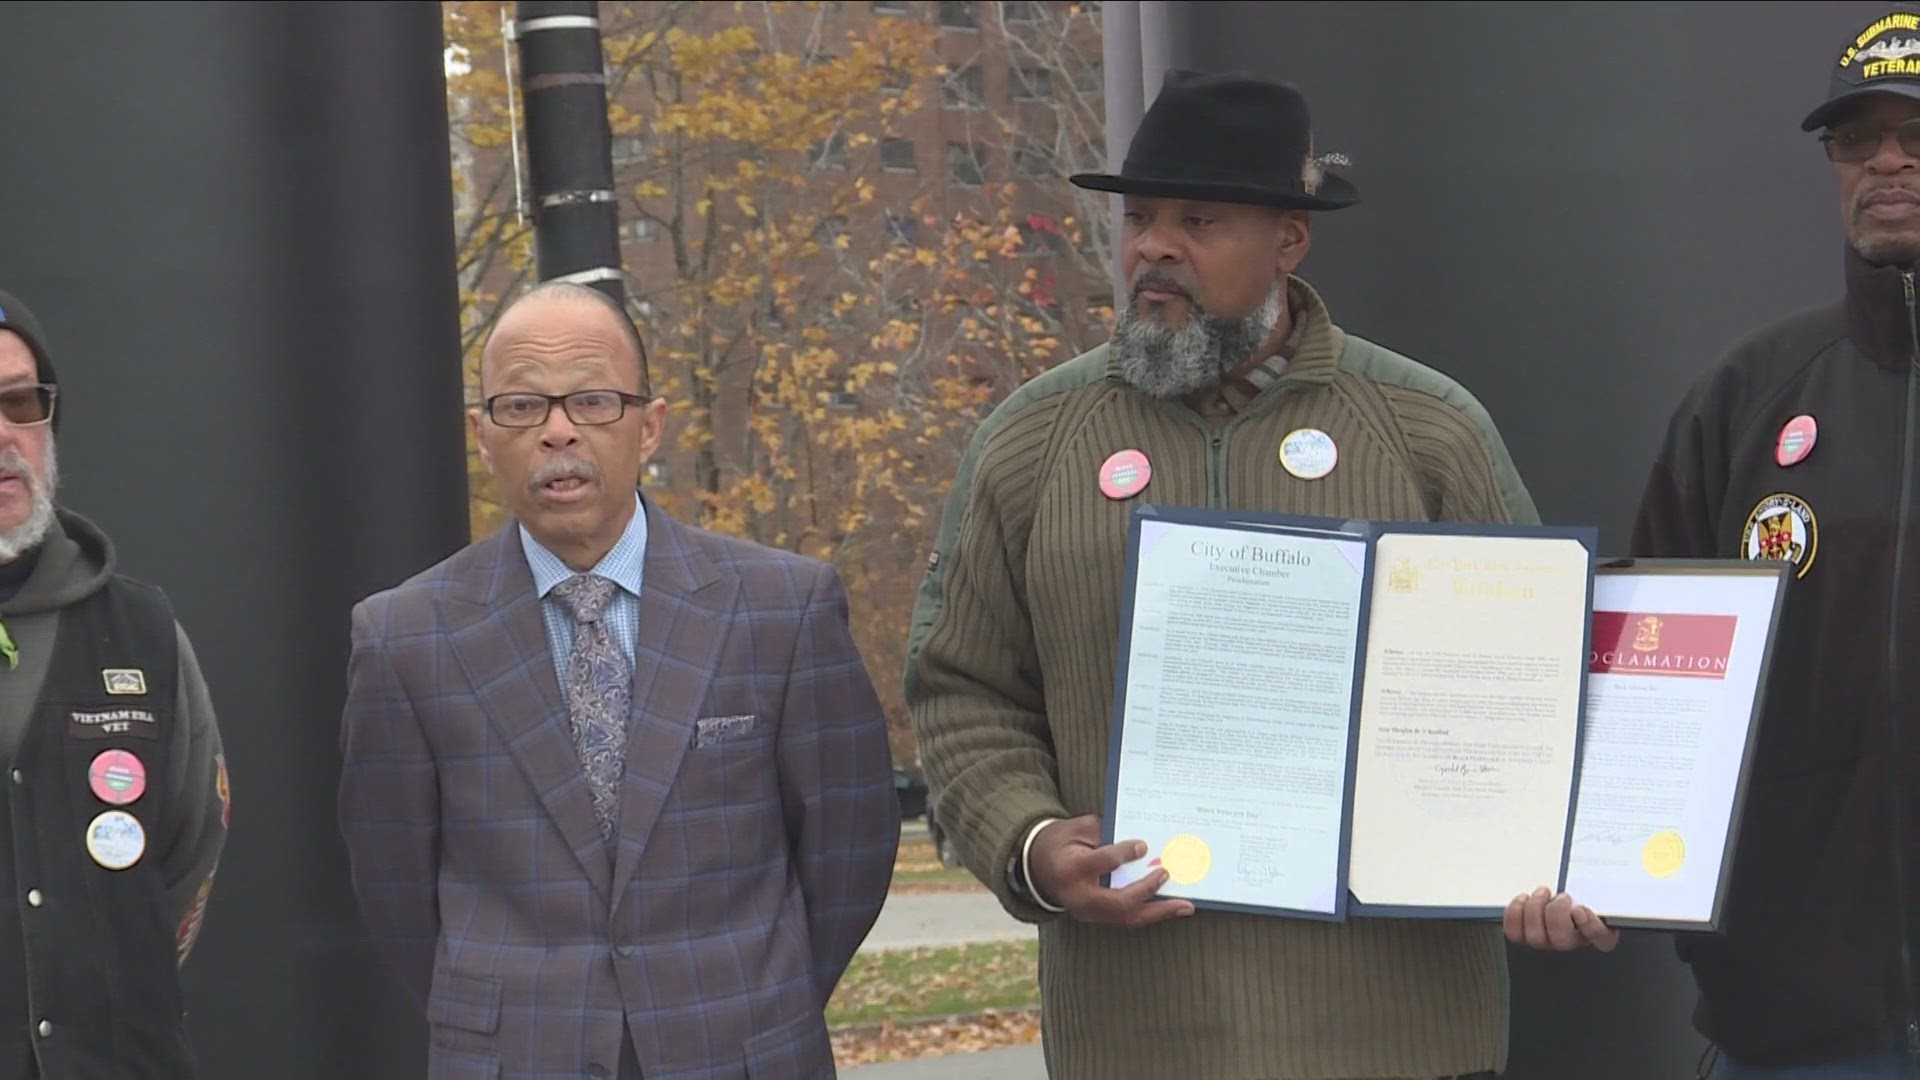 Nov. 7 has been declared Black Veterans Day in The City of Buffalo. It was a proclamation signed by Mayor Byron Brown.